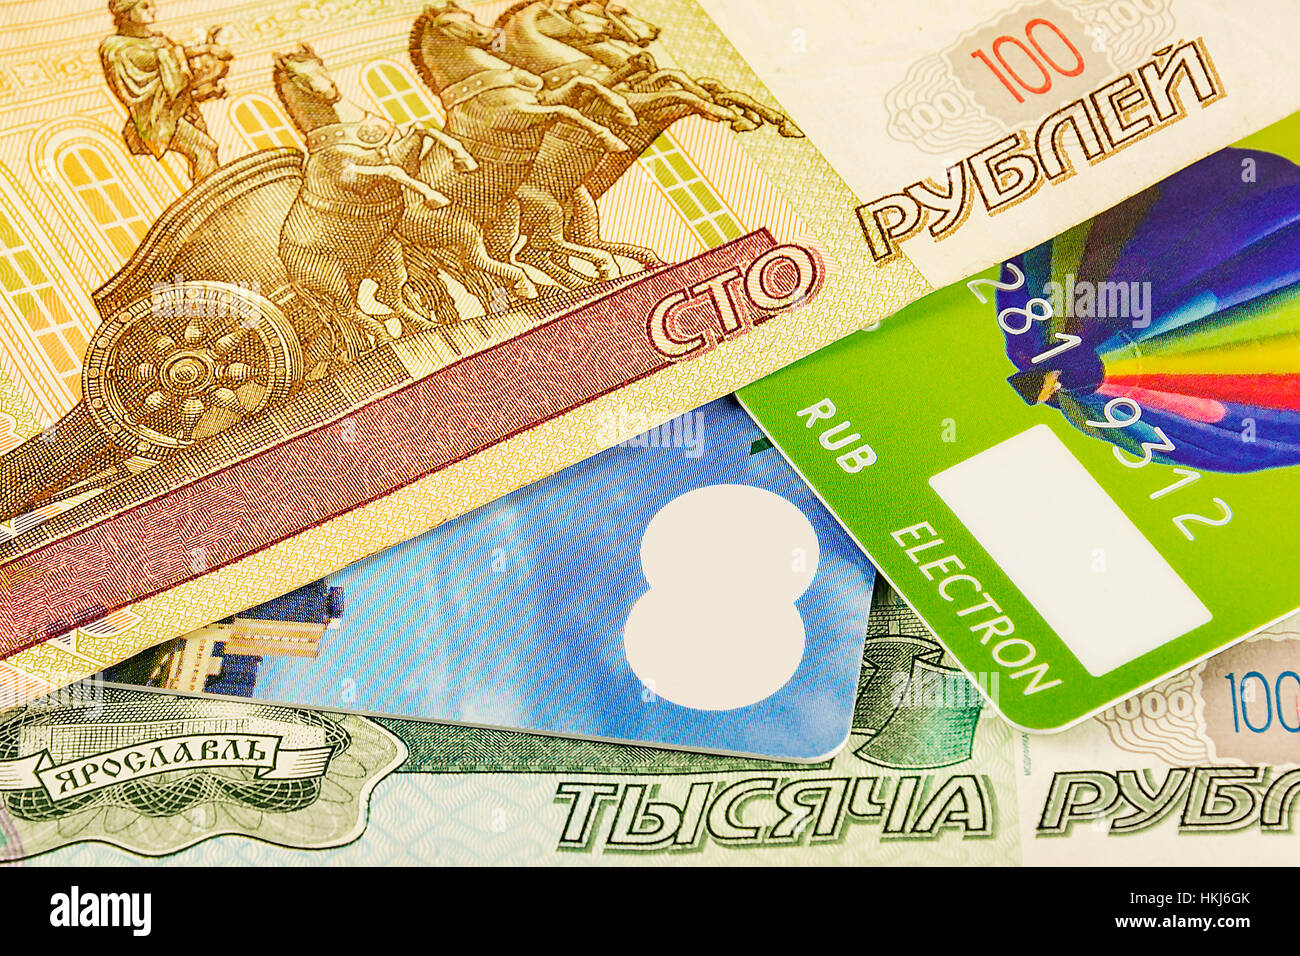 Part of the bank card cashless payment system and a part of Russian rubles banknotes Stock Photo